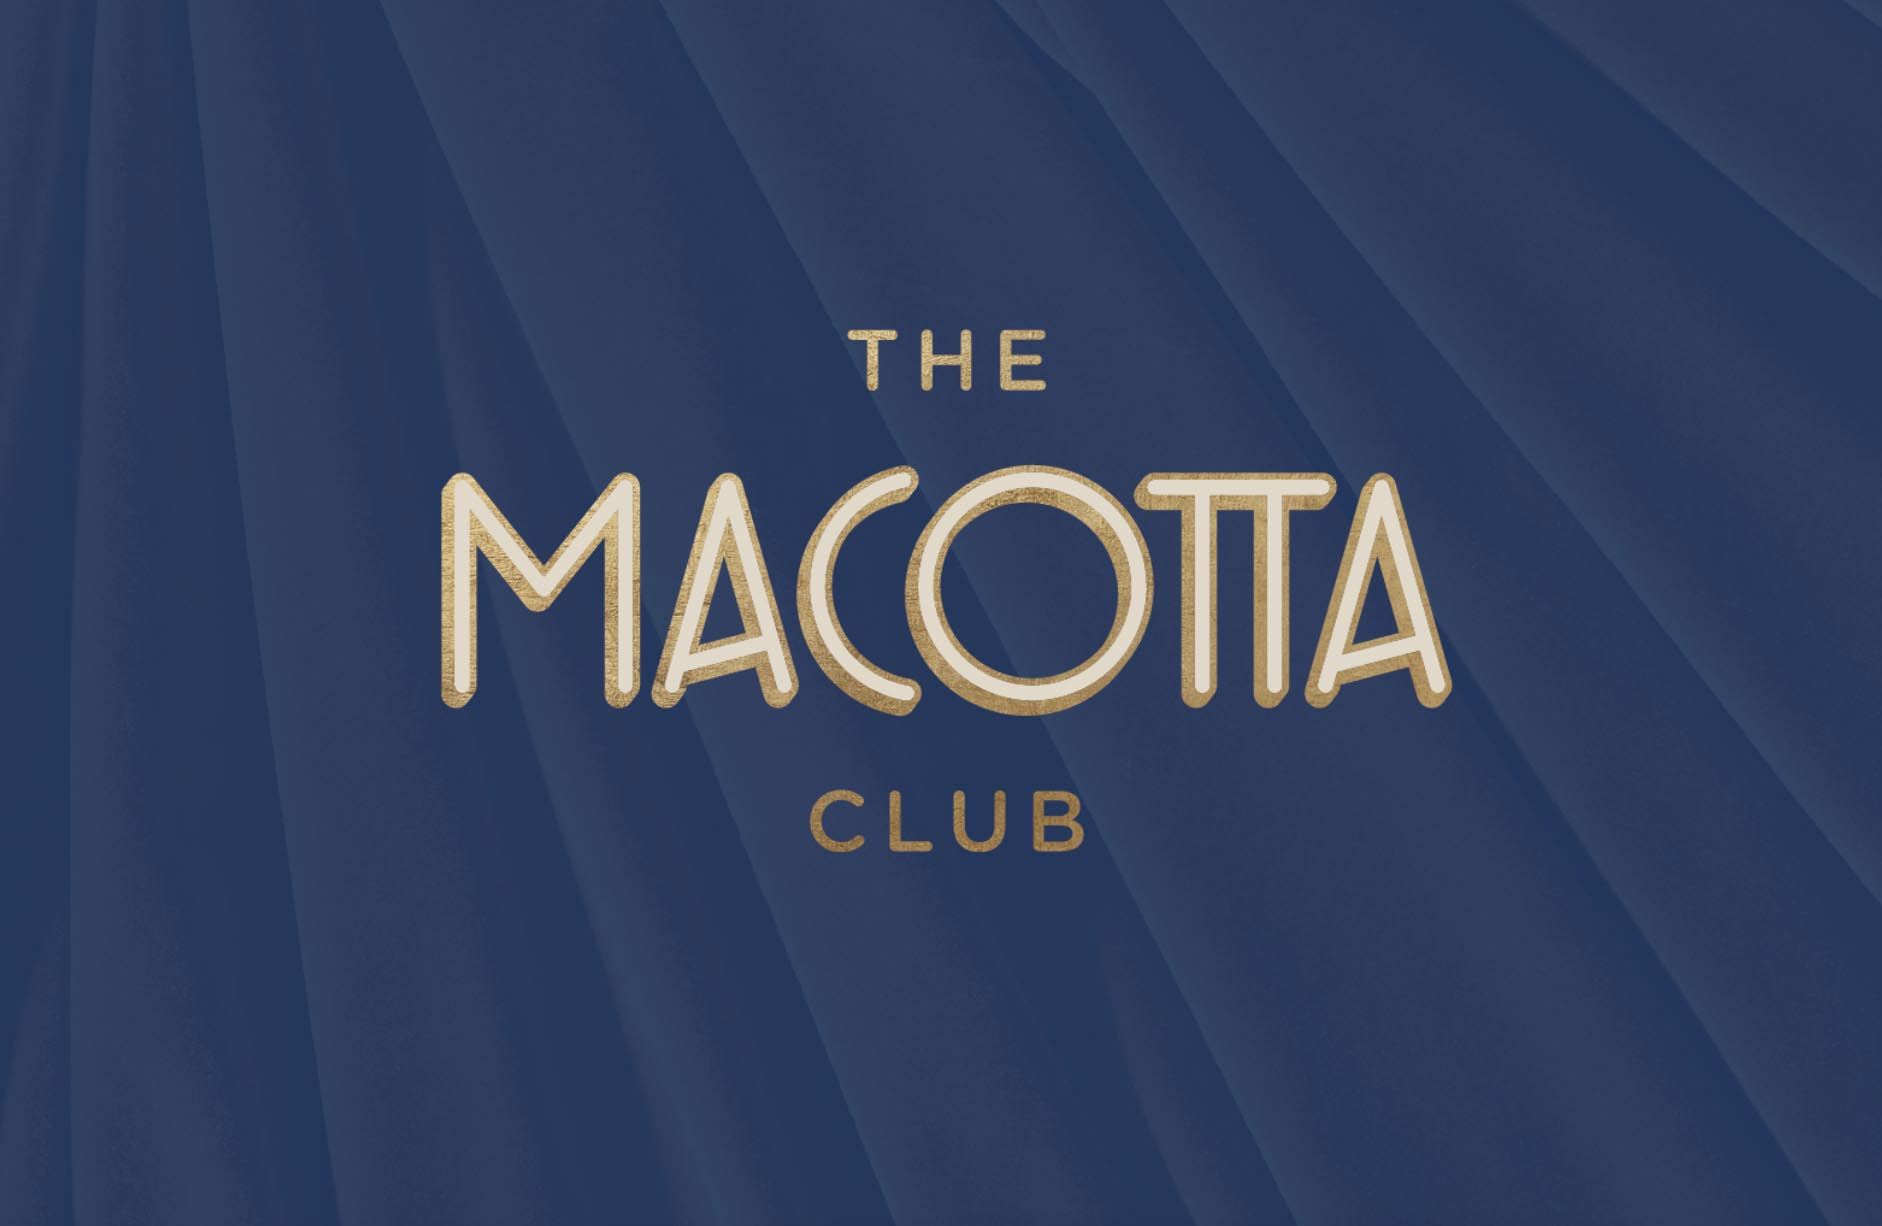 A gold-colored logo reads "The Macotta Club" in an Art Deco-inspired font, in front of a navy blue background.